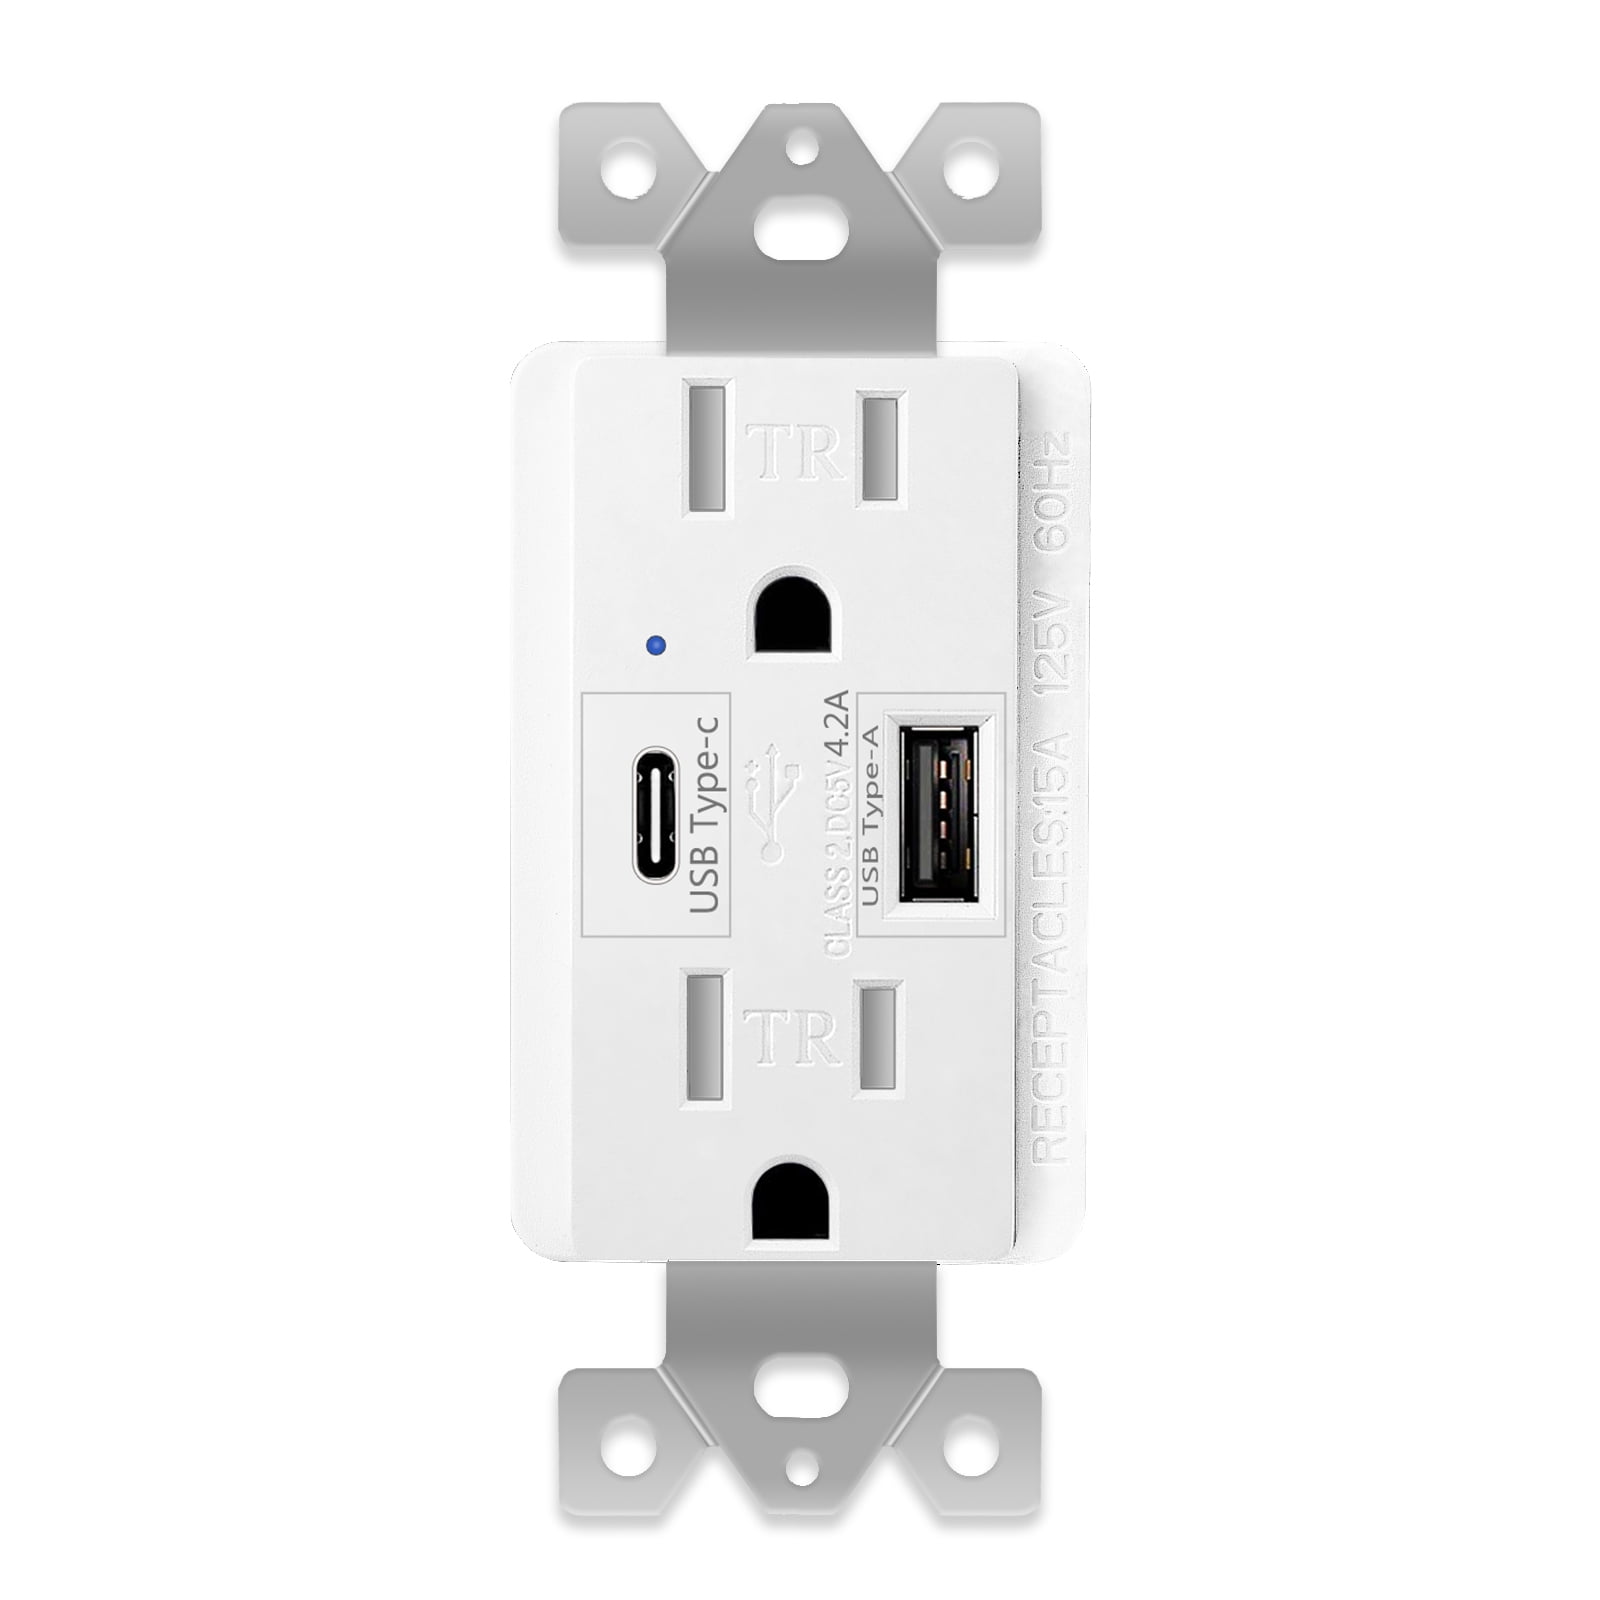 GREENCYCLE High Speed USB Port Charger and Duplex Receptacle 15-Amp Shenzhen CO 4.2A Charging Capability White, 1 Pack Ltd. Perfect.Matching Technologies Tamper Resistant Outlet Screwless Wall Plate Included for iPhone XS/MAX/XR/X/8 and more 